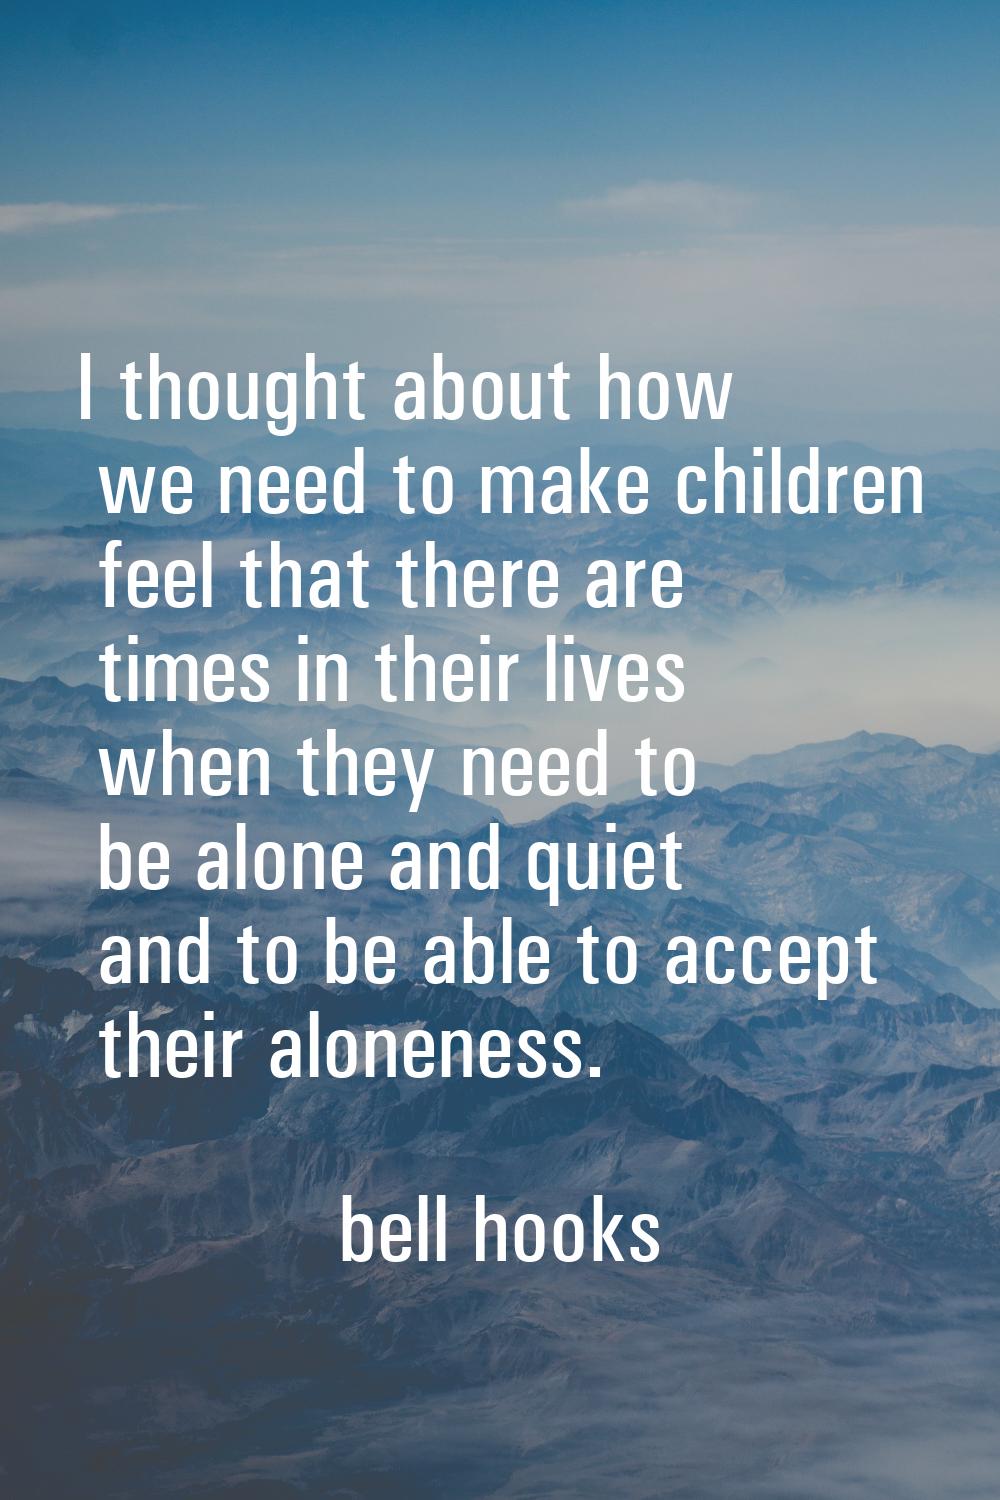 I thought about how we need to make children feel that there are times in their lives when they nee